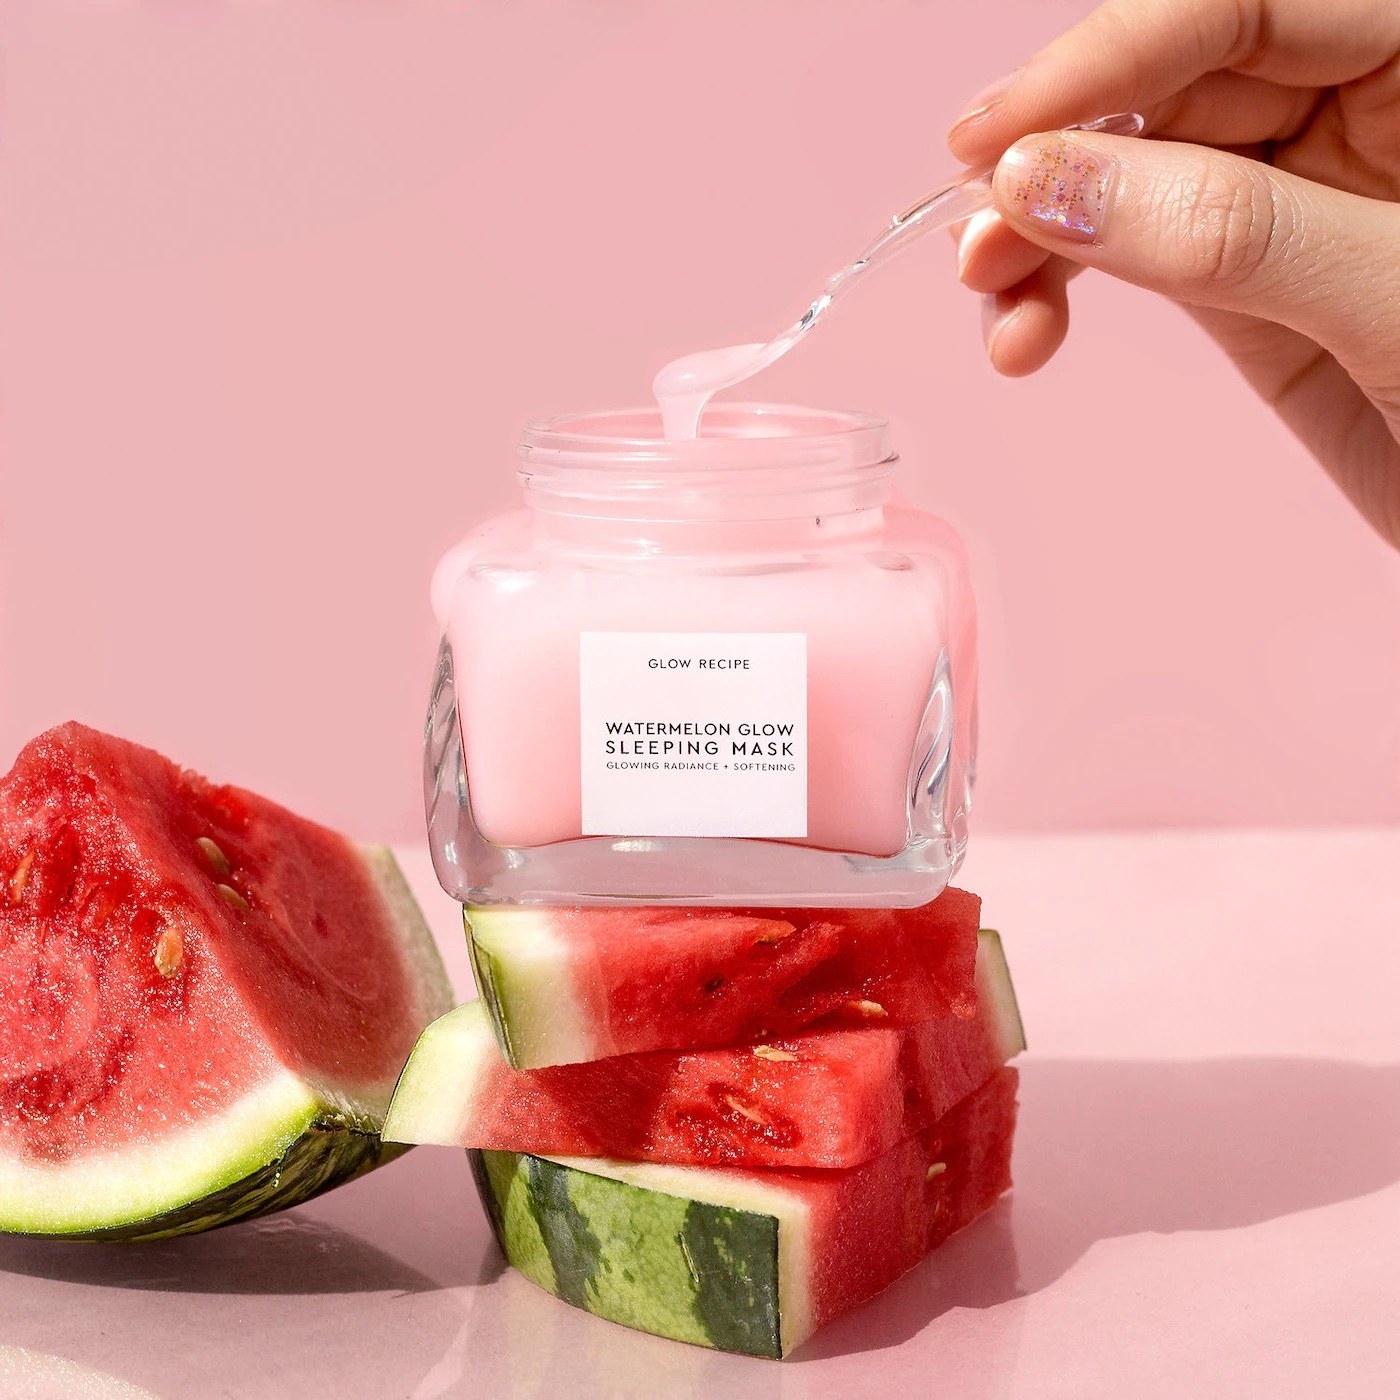 model&#x27;s hand dipping an applicator into a sleep mask jar, which is on top of sliced watermelon